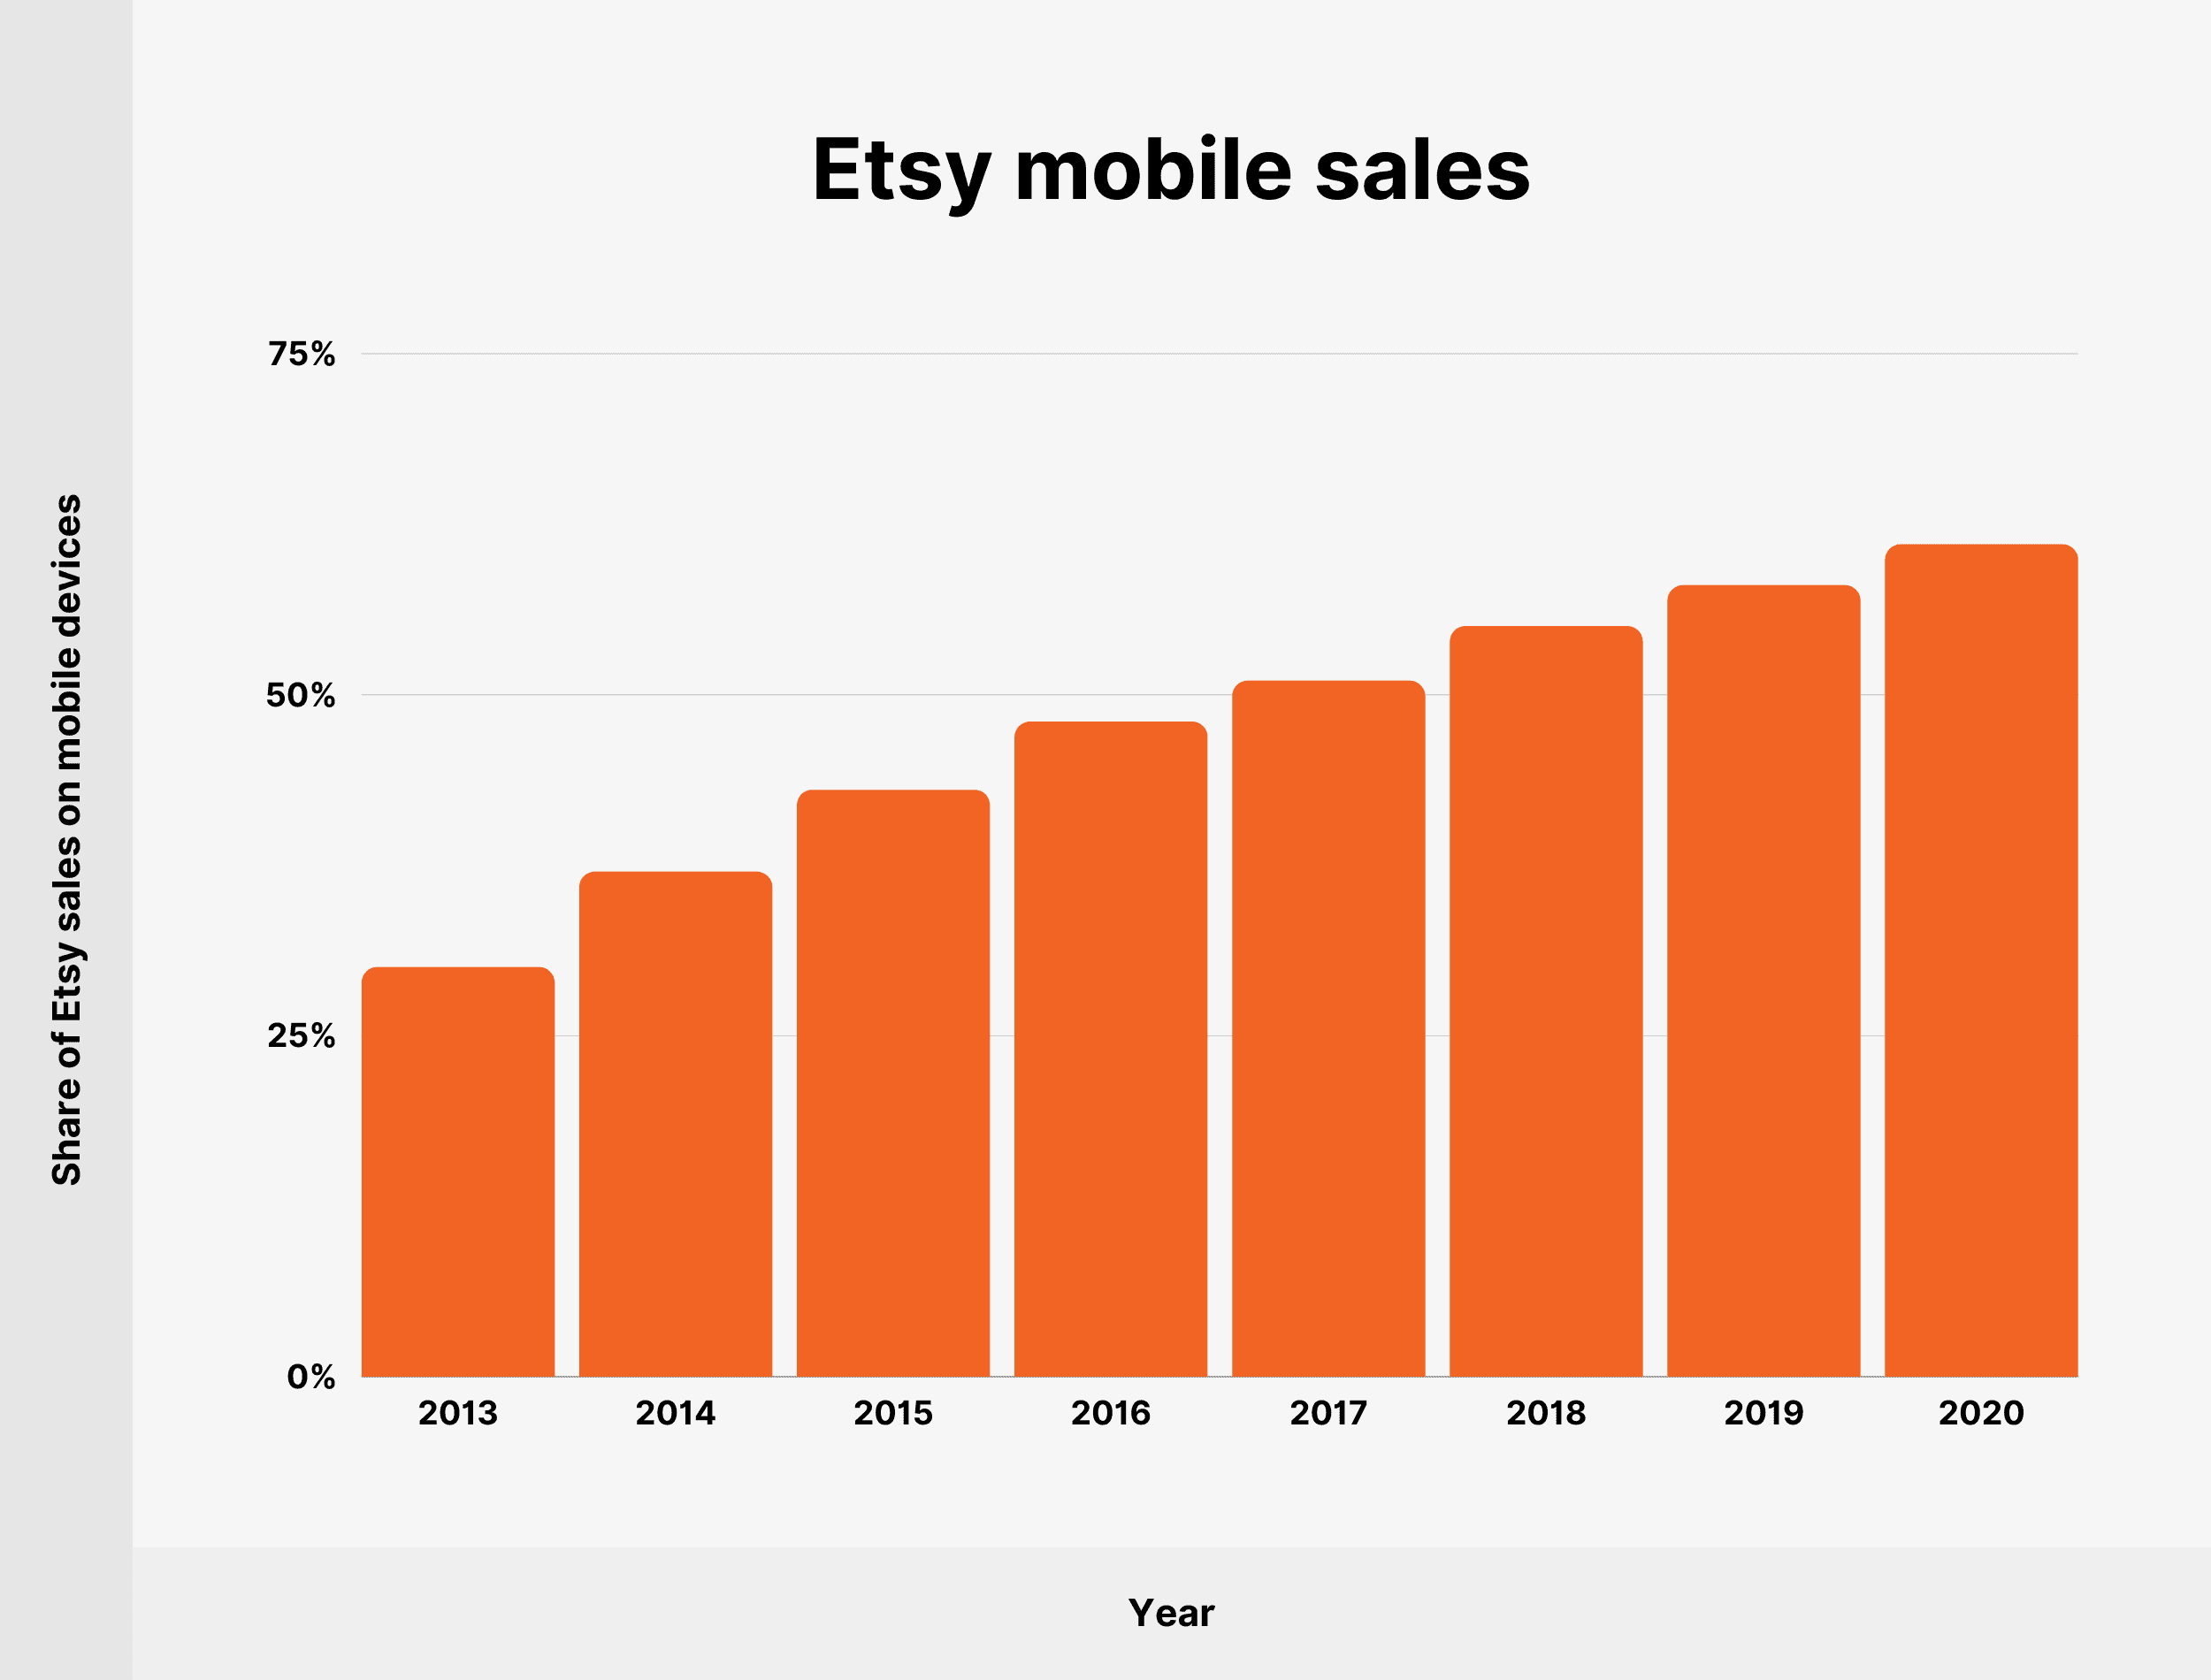 Etsy mobile sales